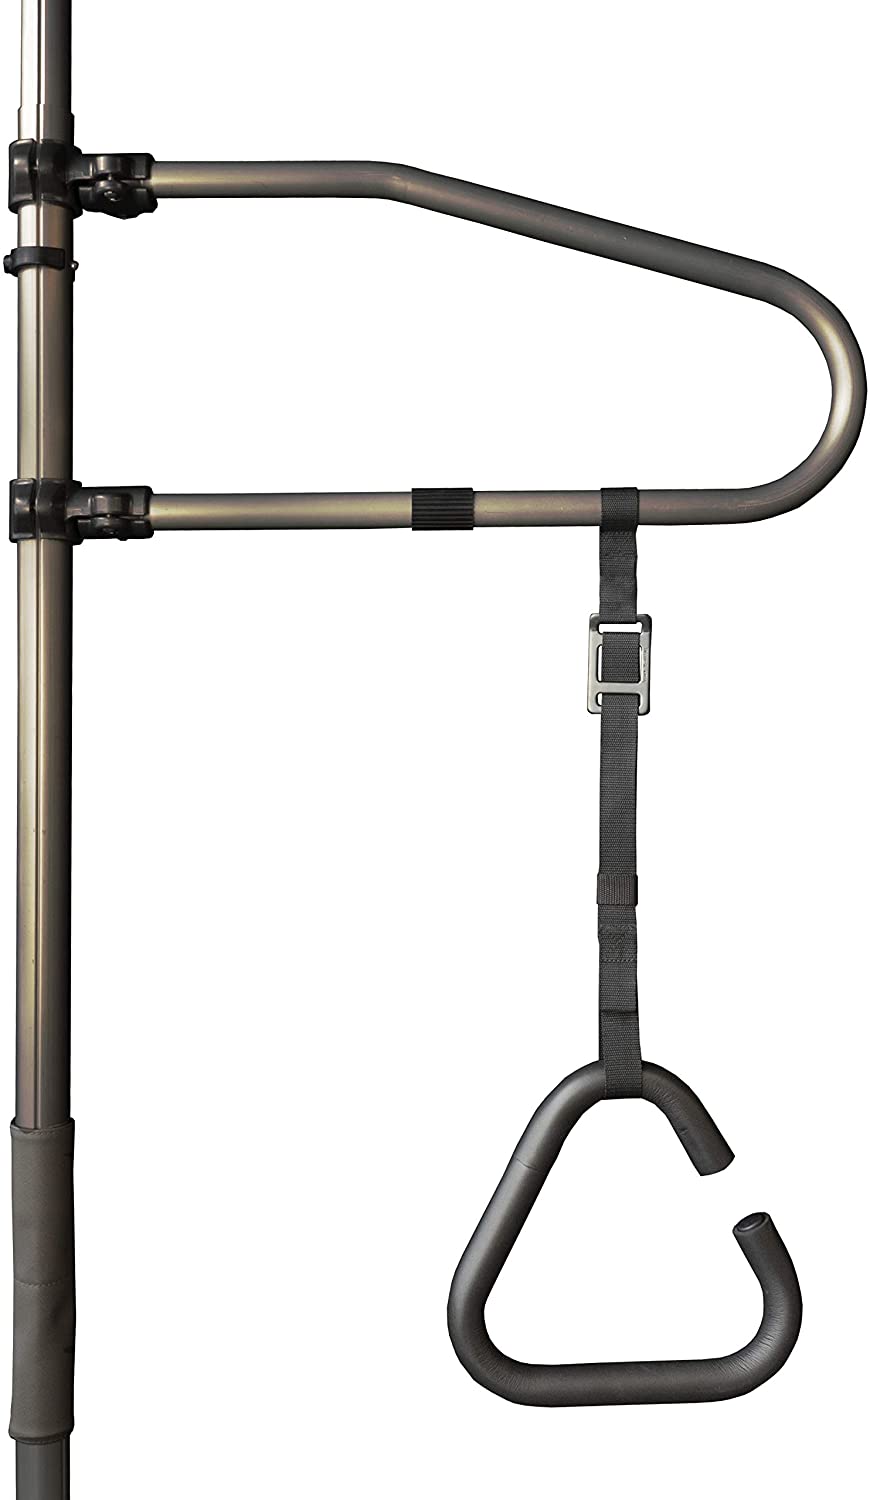 Signature Life Trapeze Grab Bar Accessory, Compatible with The Signature Life Sure Stand Pole